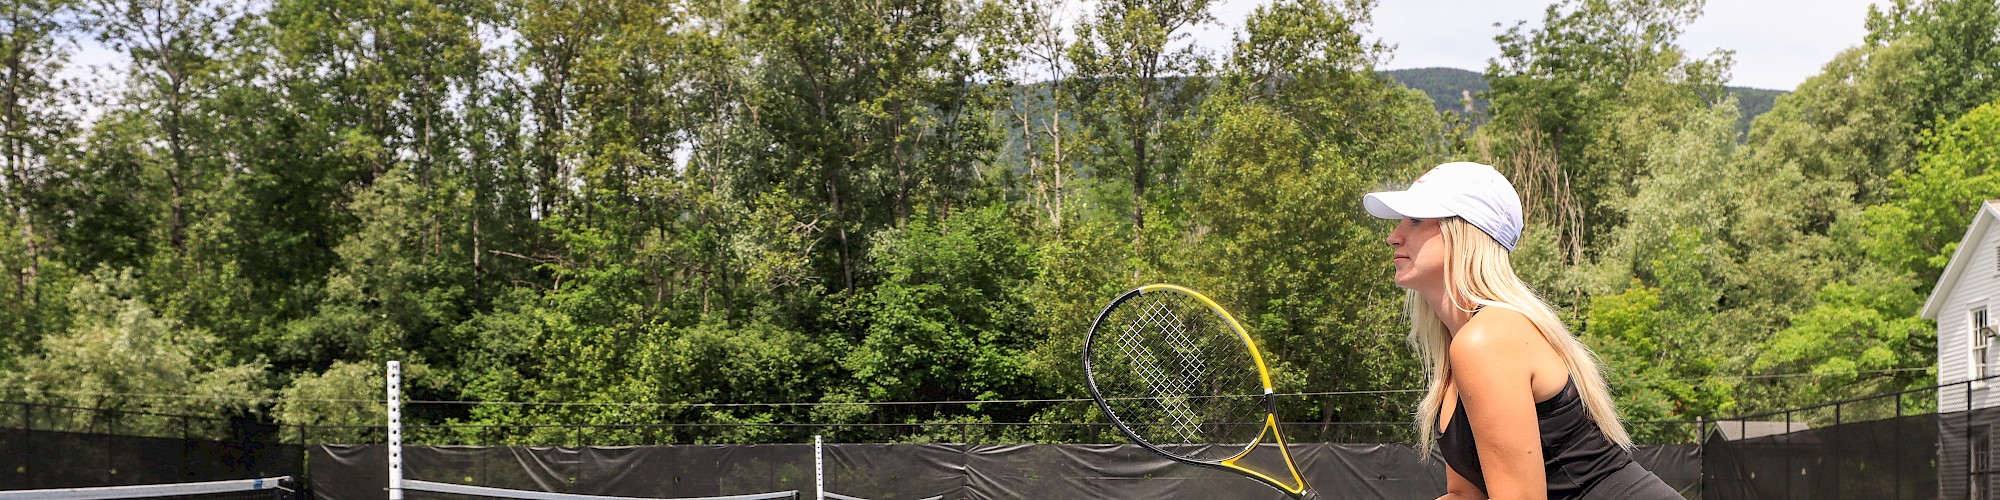 A person in athletic gear holds a tennis racket while preparing to play on an outdoor tennis court surrounded by trees.